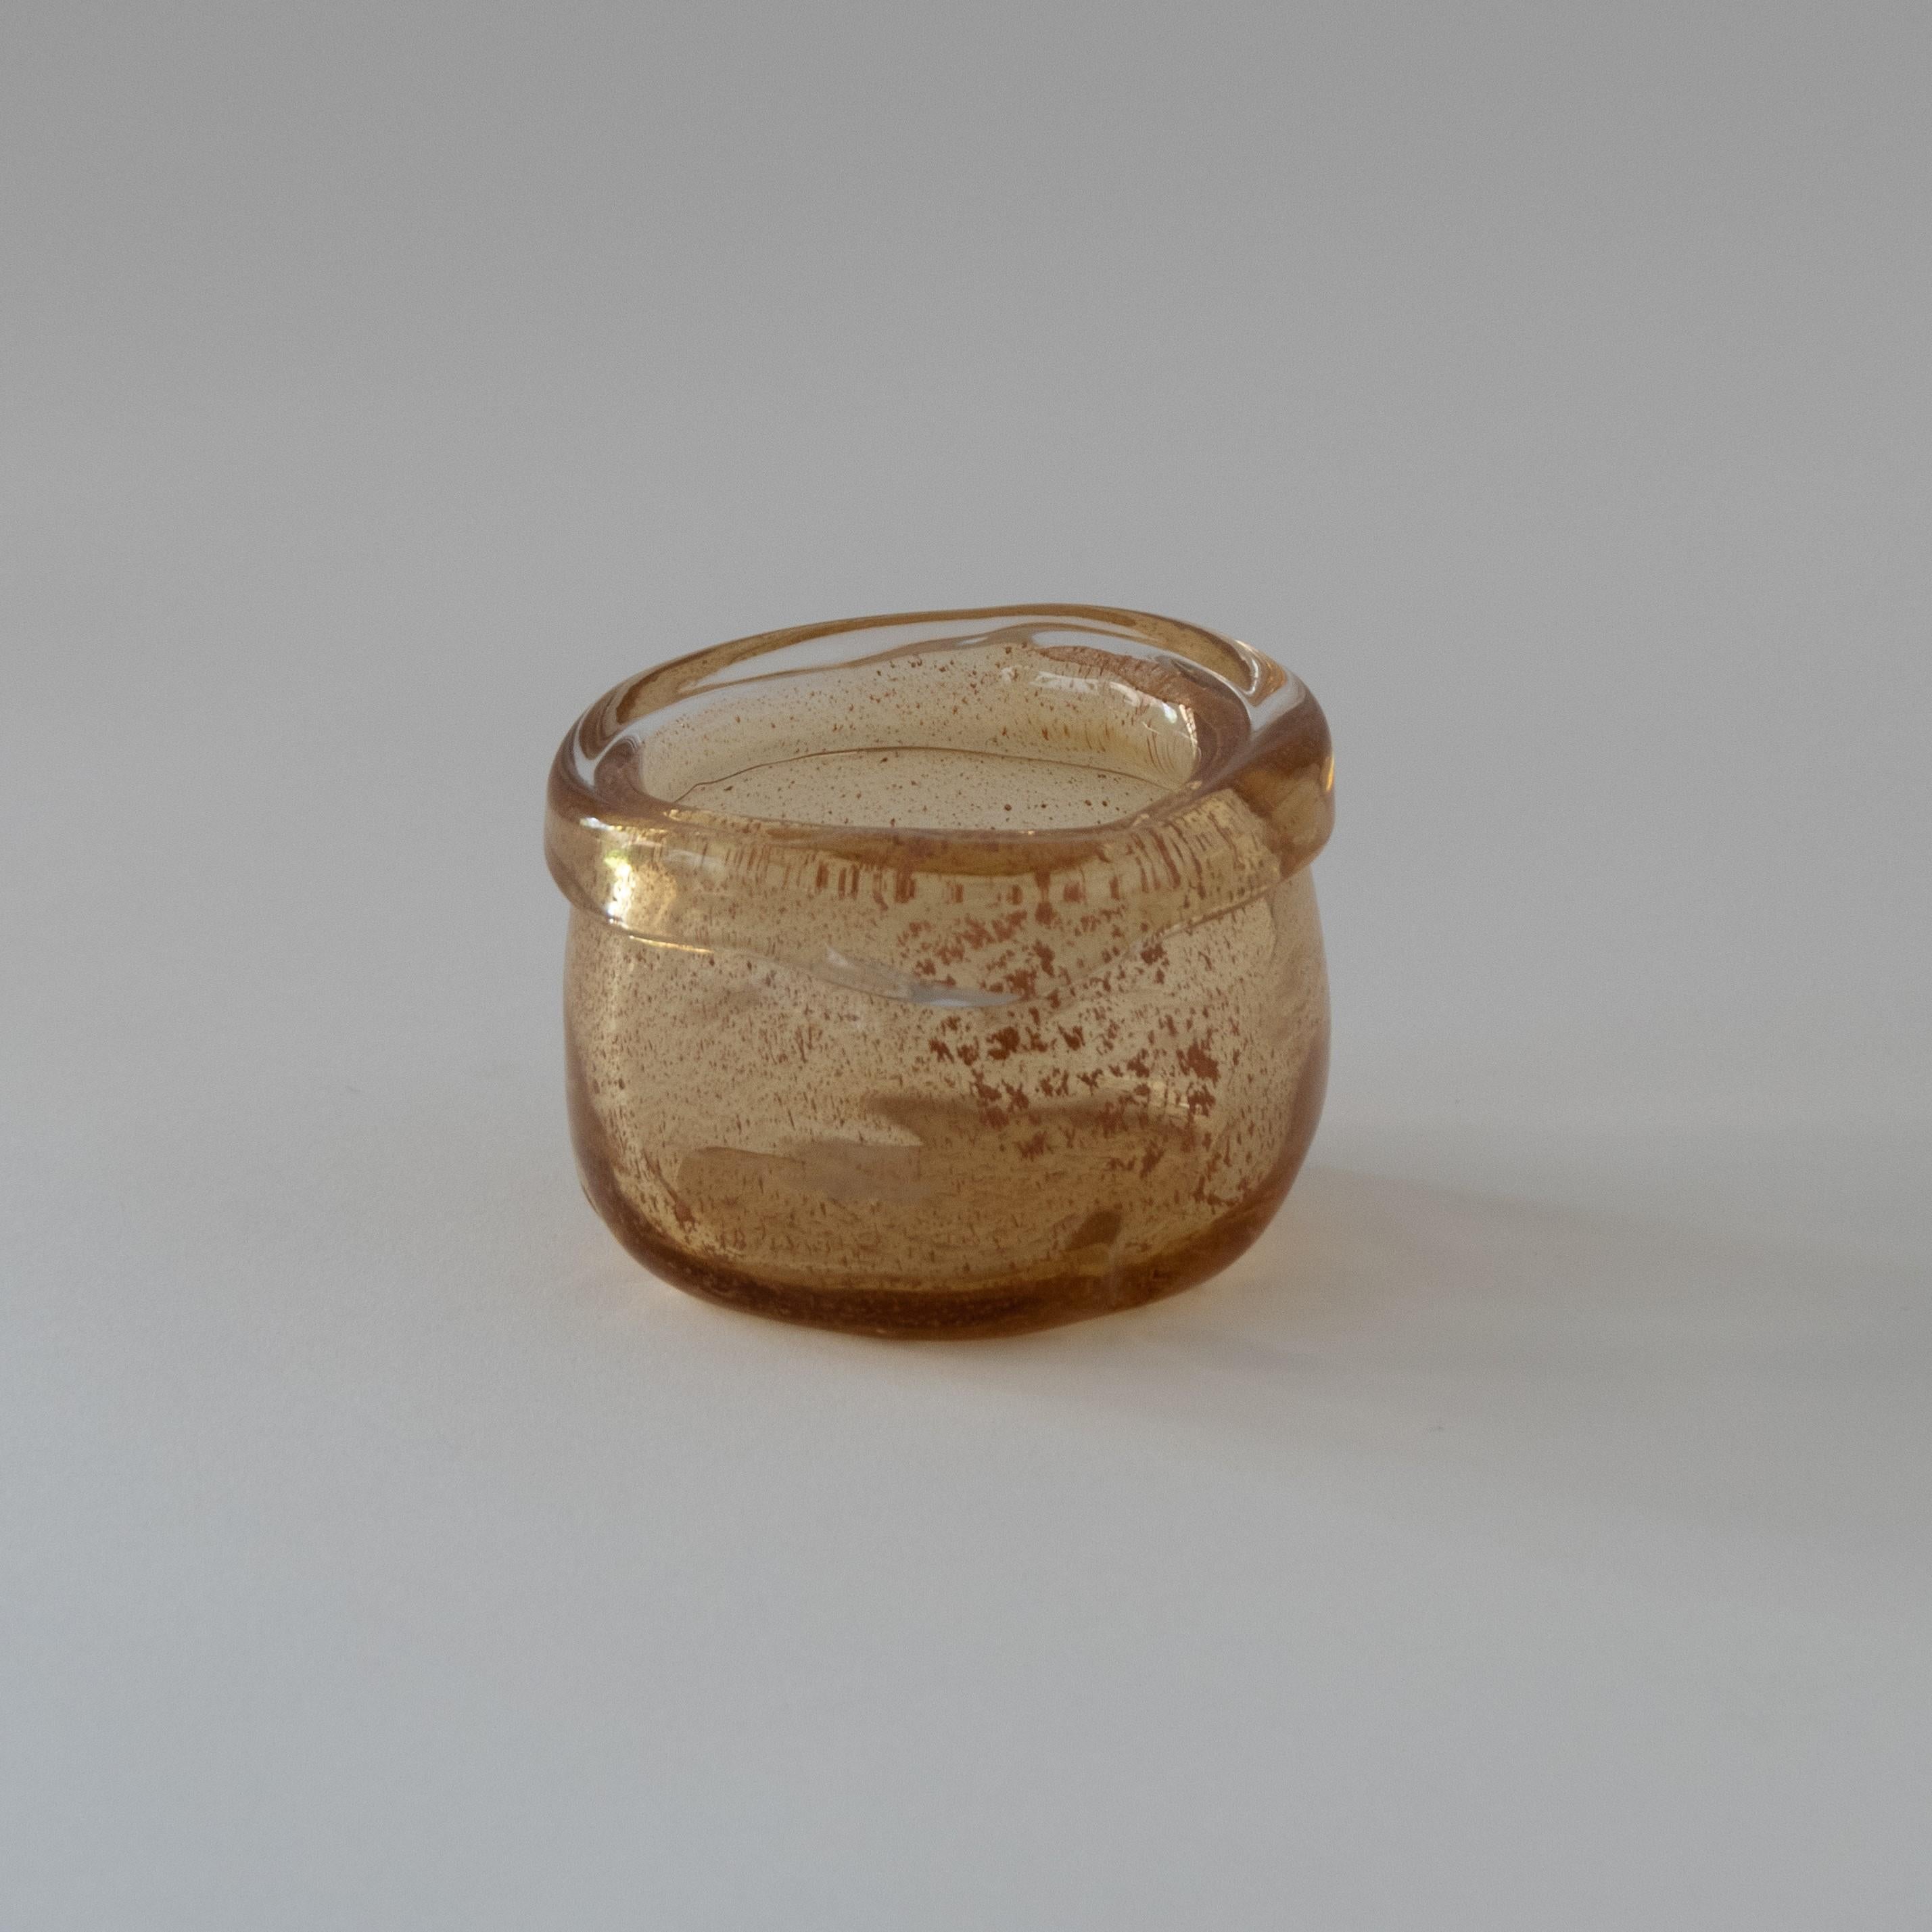 Rubi glass cup by Studio Terre
One of a Kind
Dimensions: 7 x H 8 cm
Materials: Amber-coloured Murano glass cup with terracotta powder
Avaiable to order in sets of 3 or 6 pieces.

STUDIO TERRE, an experimental art studio where art is created